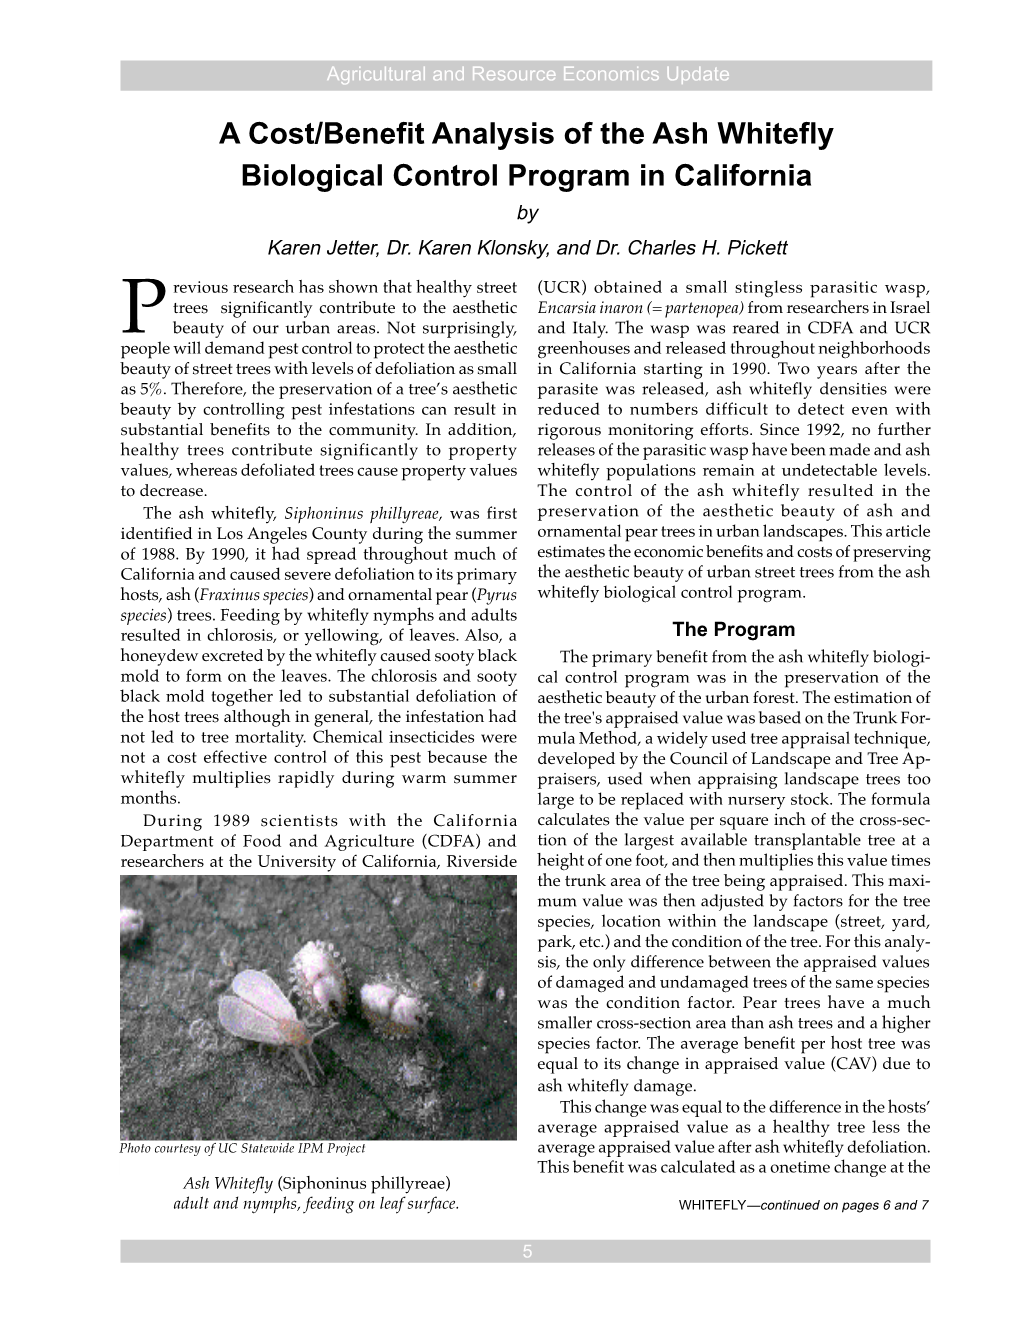 A Cost/Benefit Analysis of the Ash Whitefly Biological Control Program in California by Karen Jetter, Dr